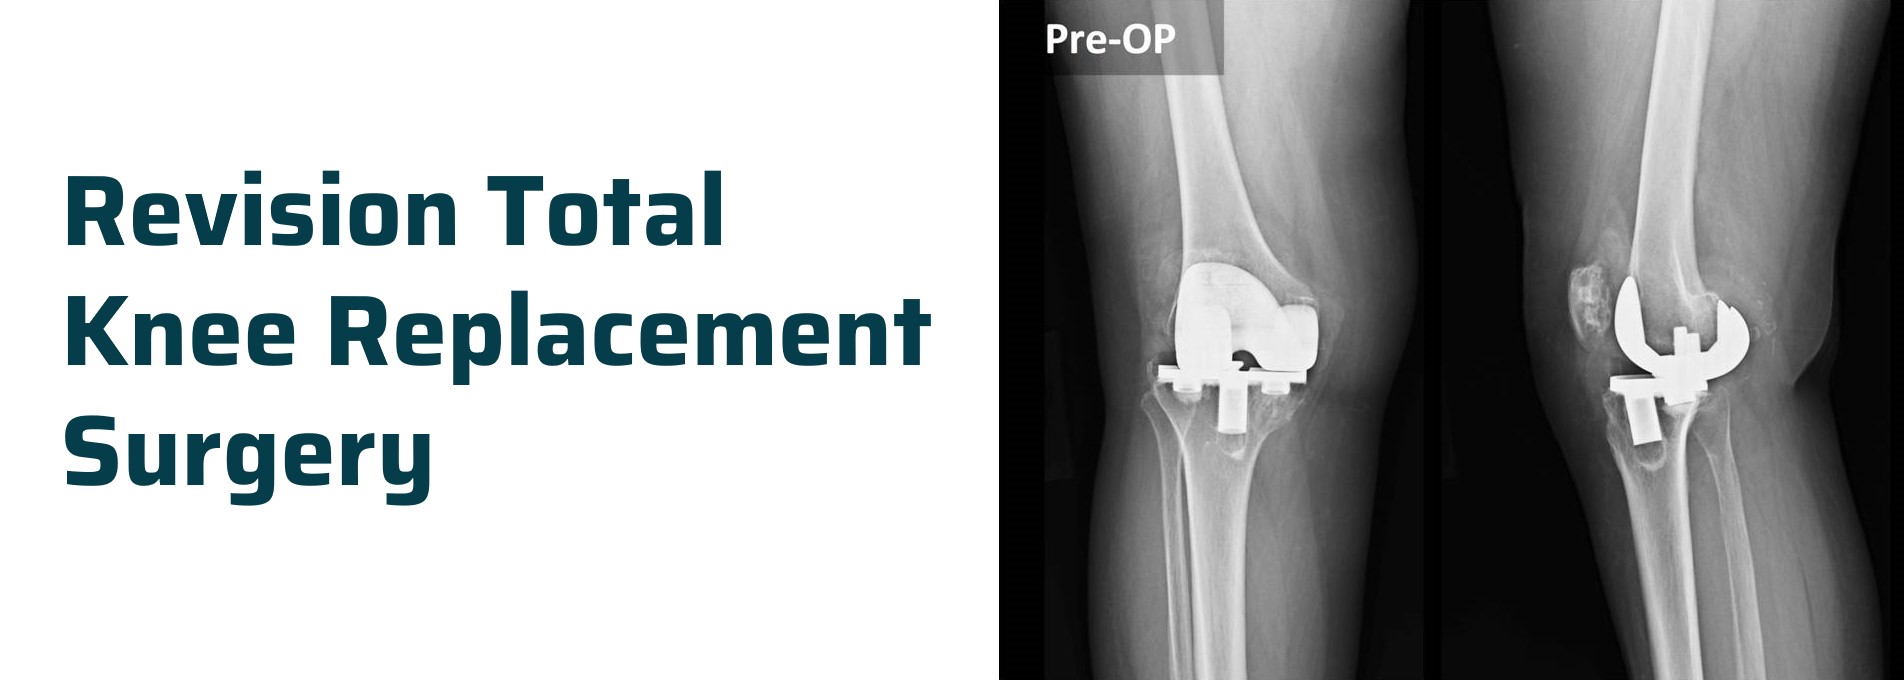 Revision Total Knee Replacement Surgery Ahmedabad Dr Rachit Sheth